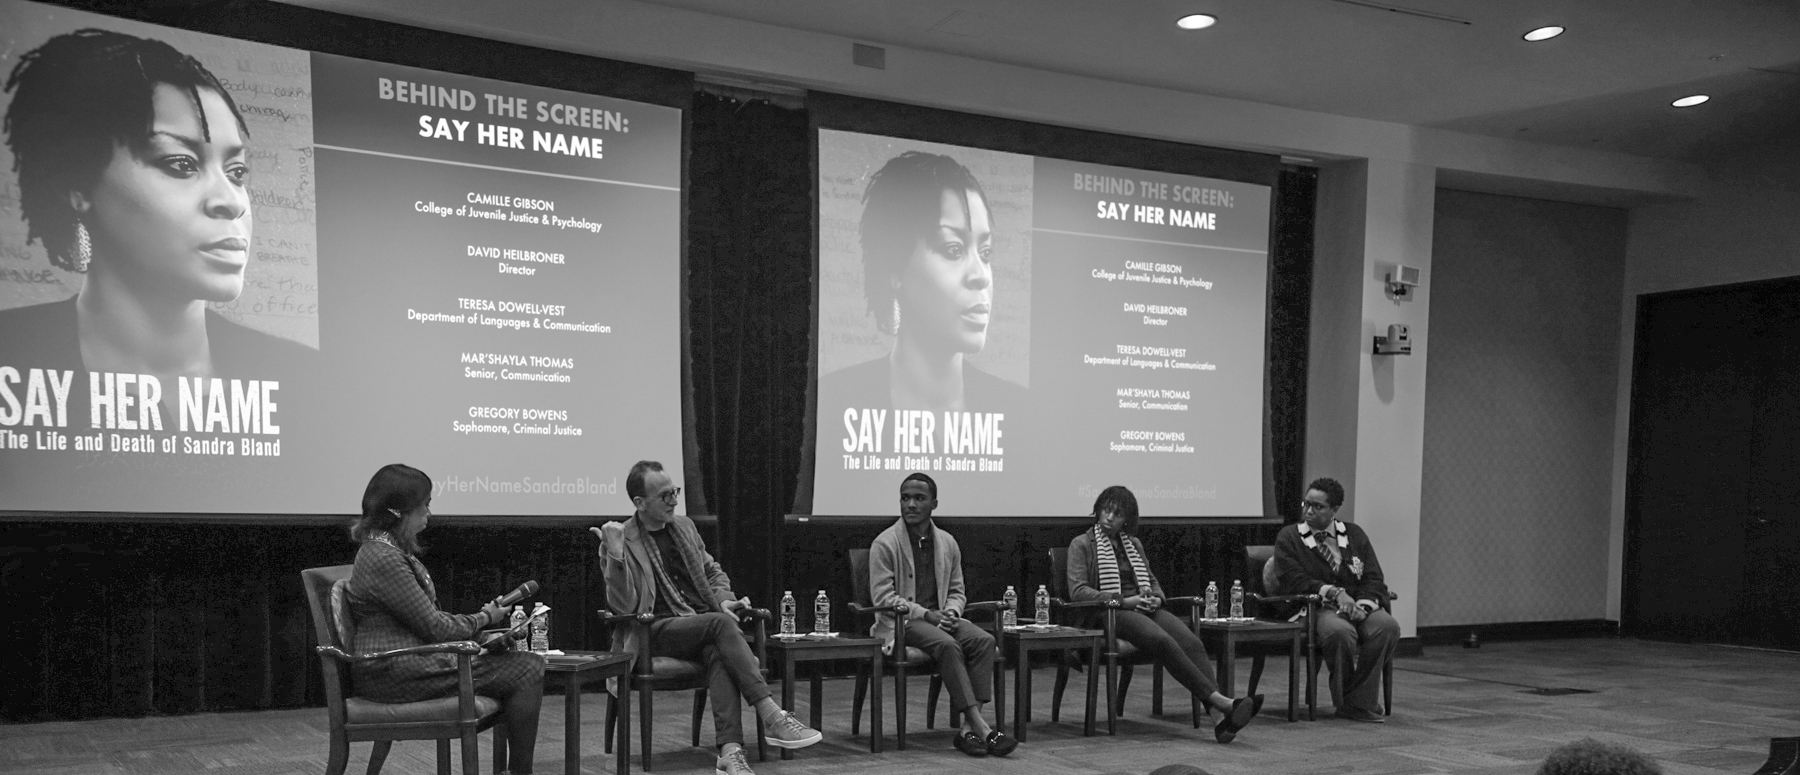 Say Her Name: The Life and Death of Sandra Bland - 2 Screens of Documentary Film with Director and Other Panelists